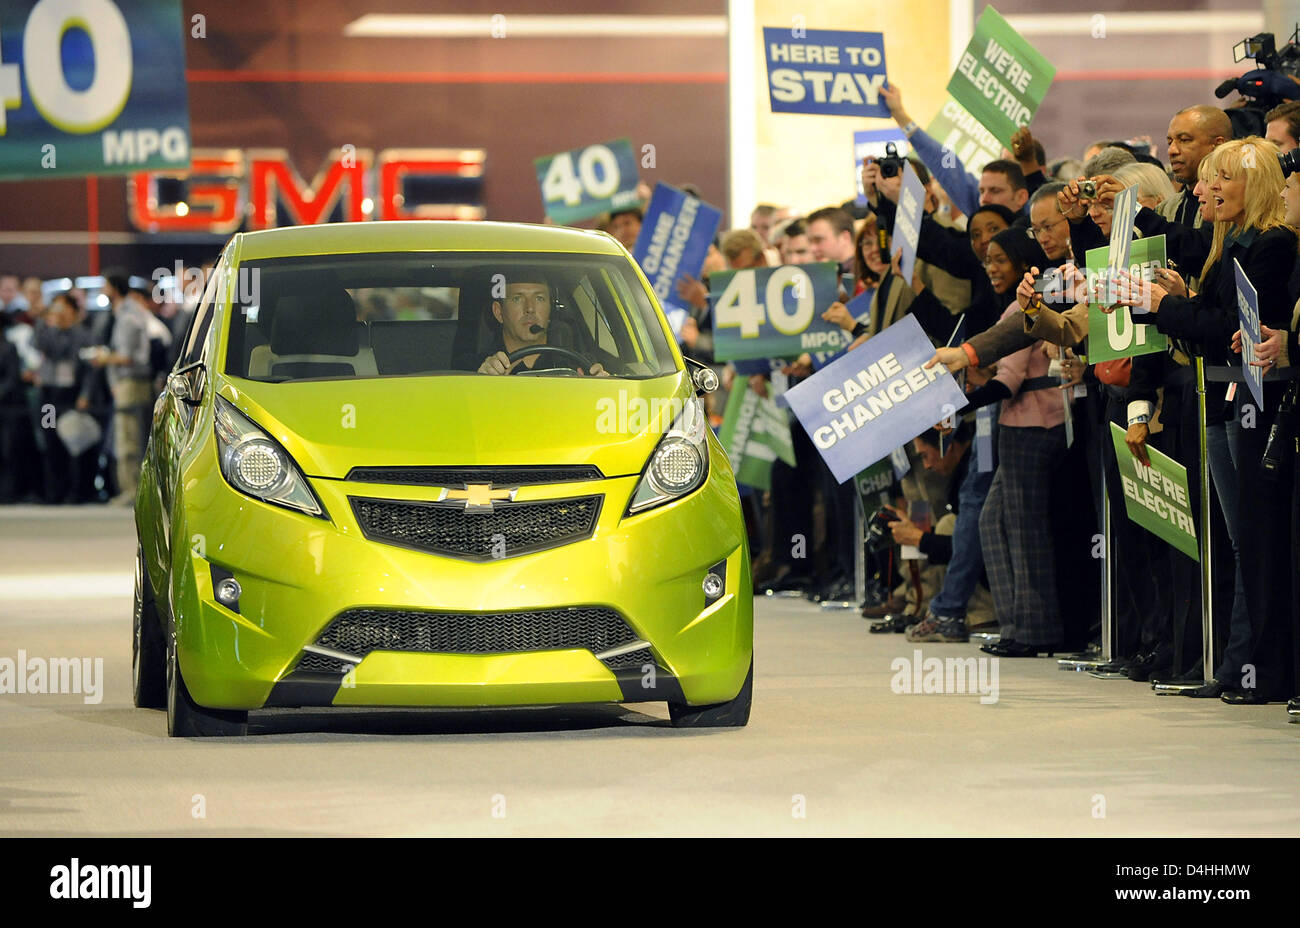 A Chevrolet Spark is pictured at the GM stand during the General Motors presentation at the North American International Auto Show (NAIAS) in Detroit, USA, 11 January 2009. Photo: Marijan Murat Stock Photo